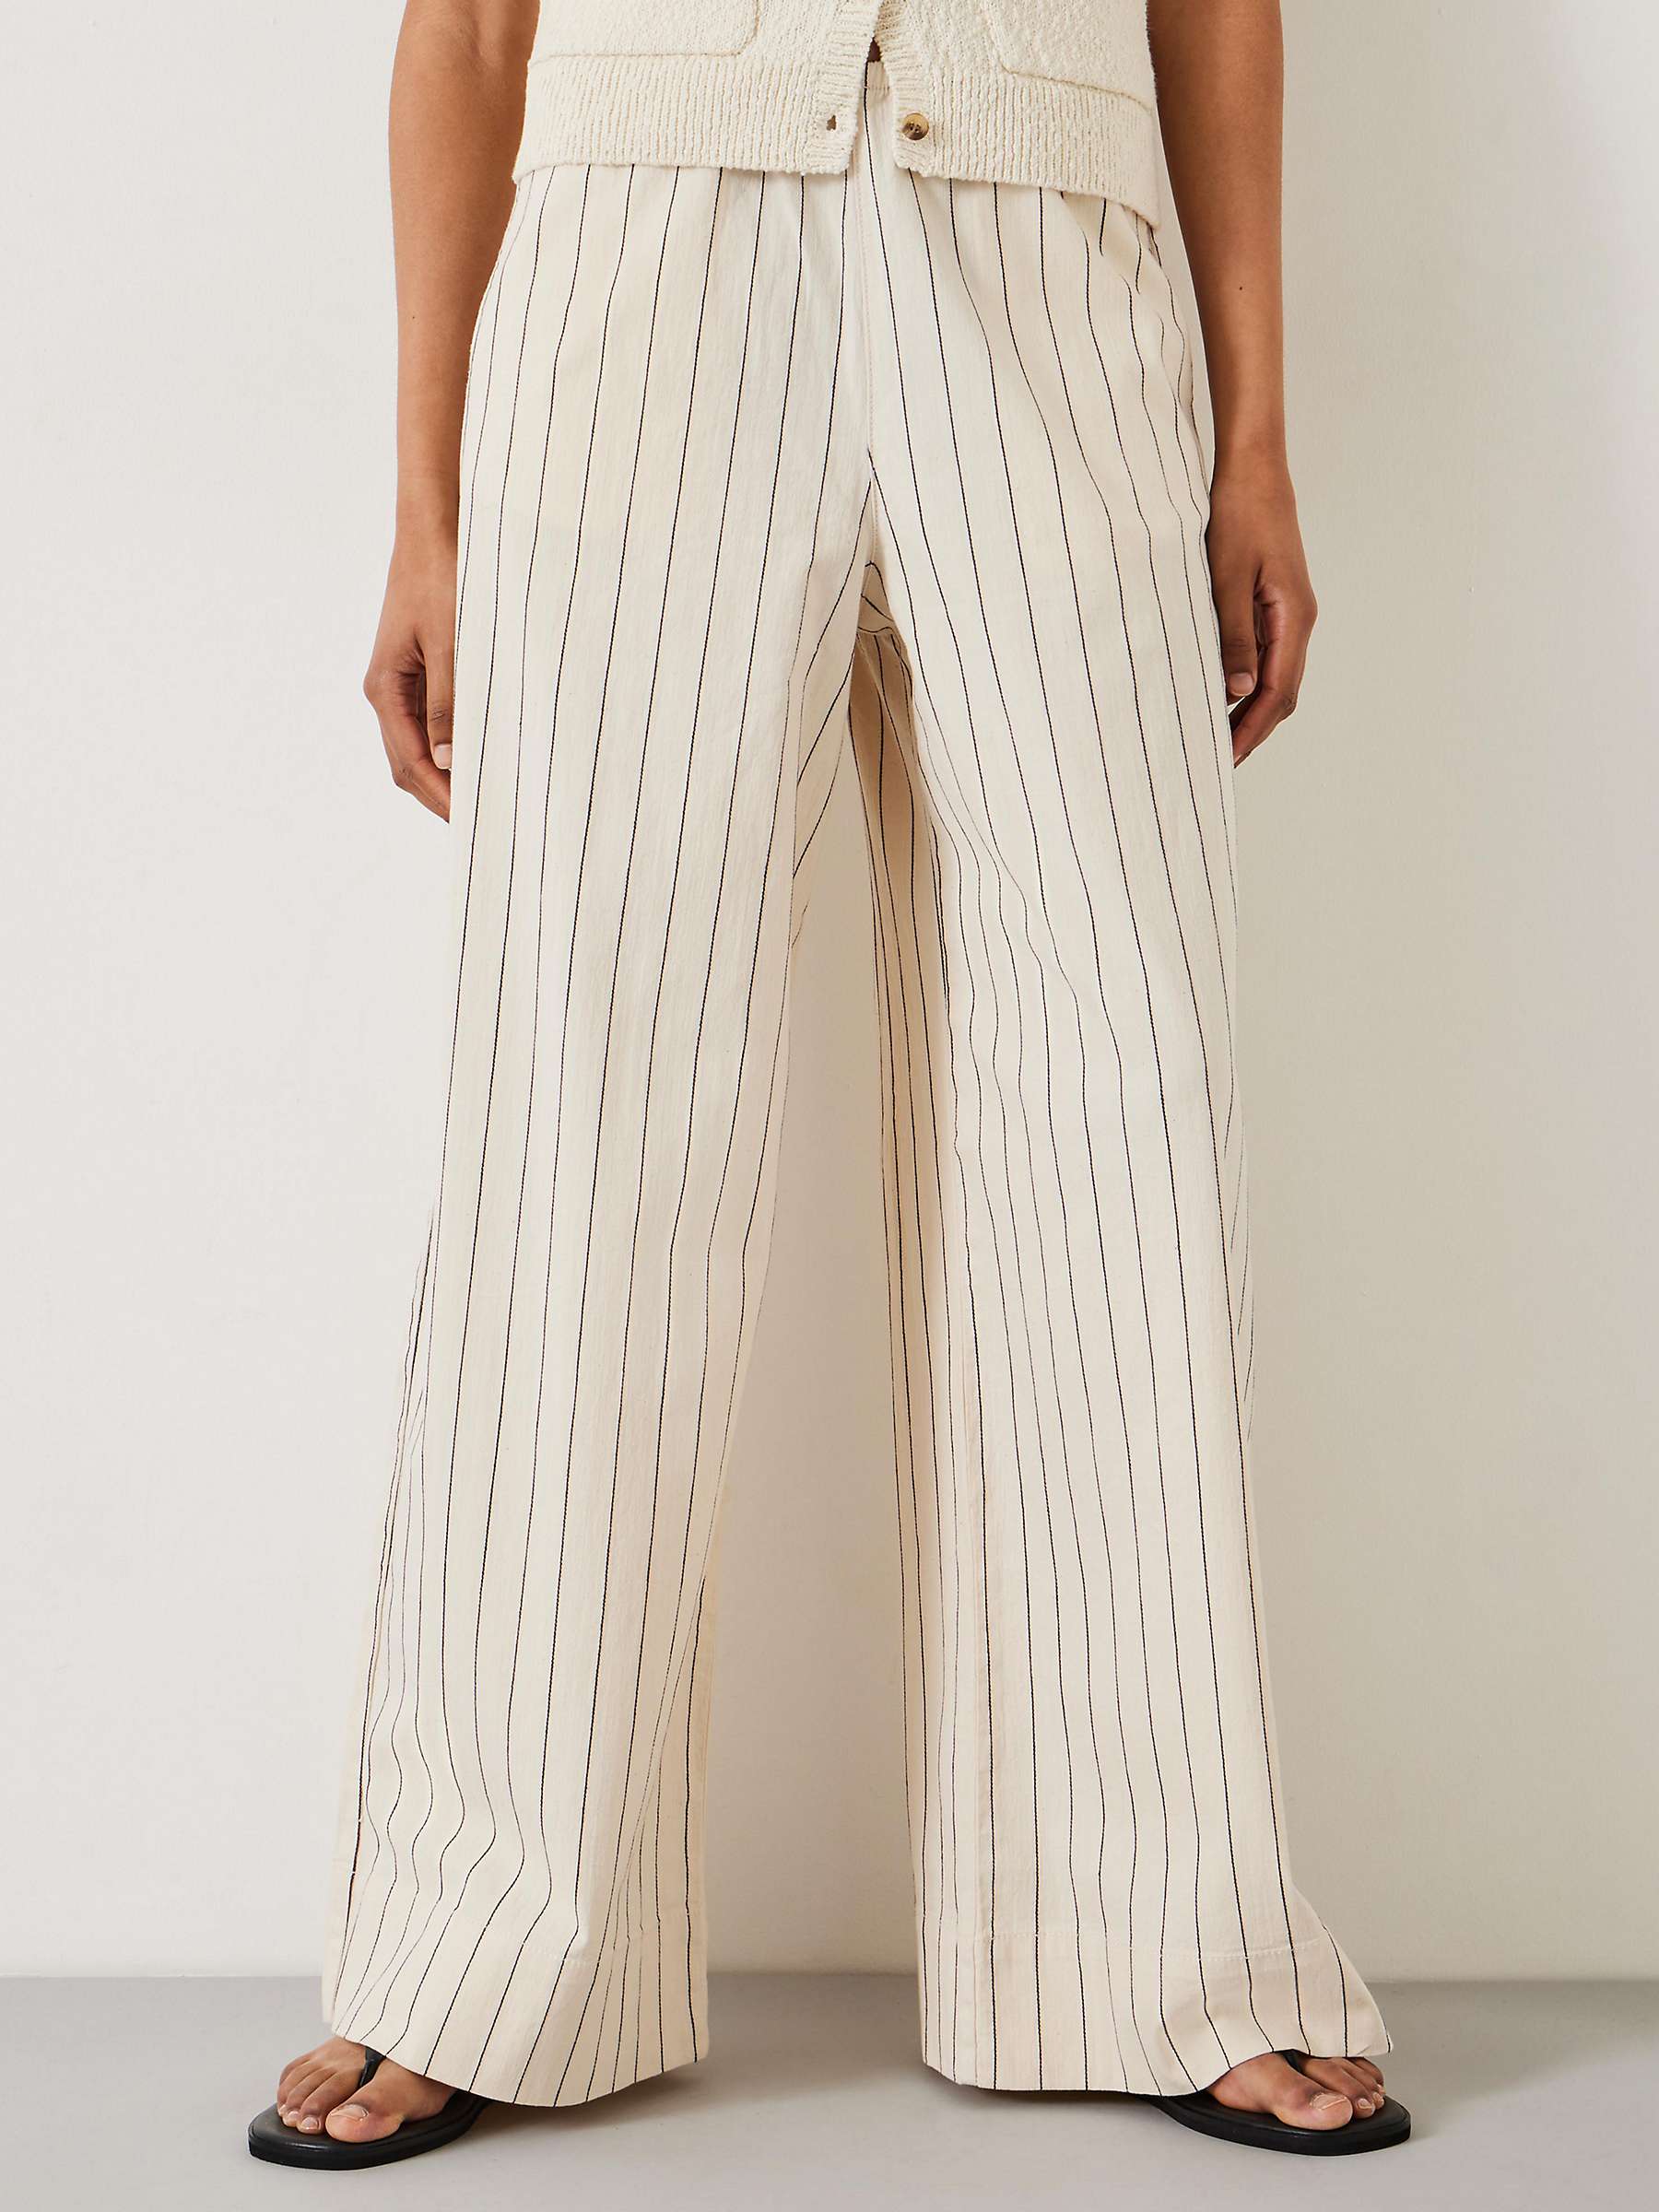 Buy HUSH Elissia Striped Wide Leg Trousers, White/Black Online at johnlewis.com